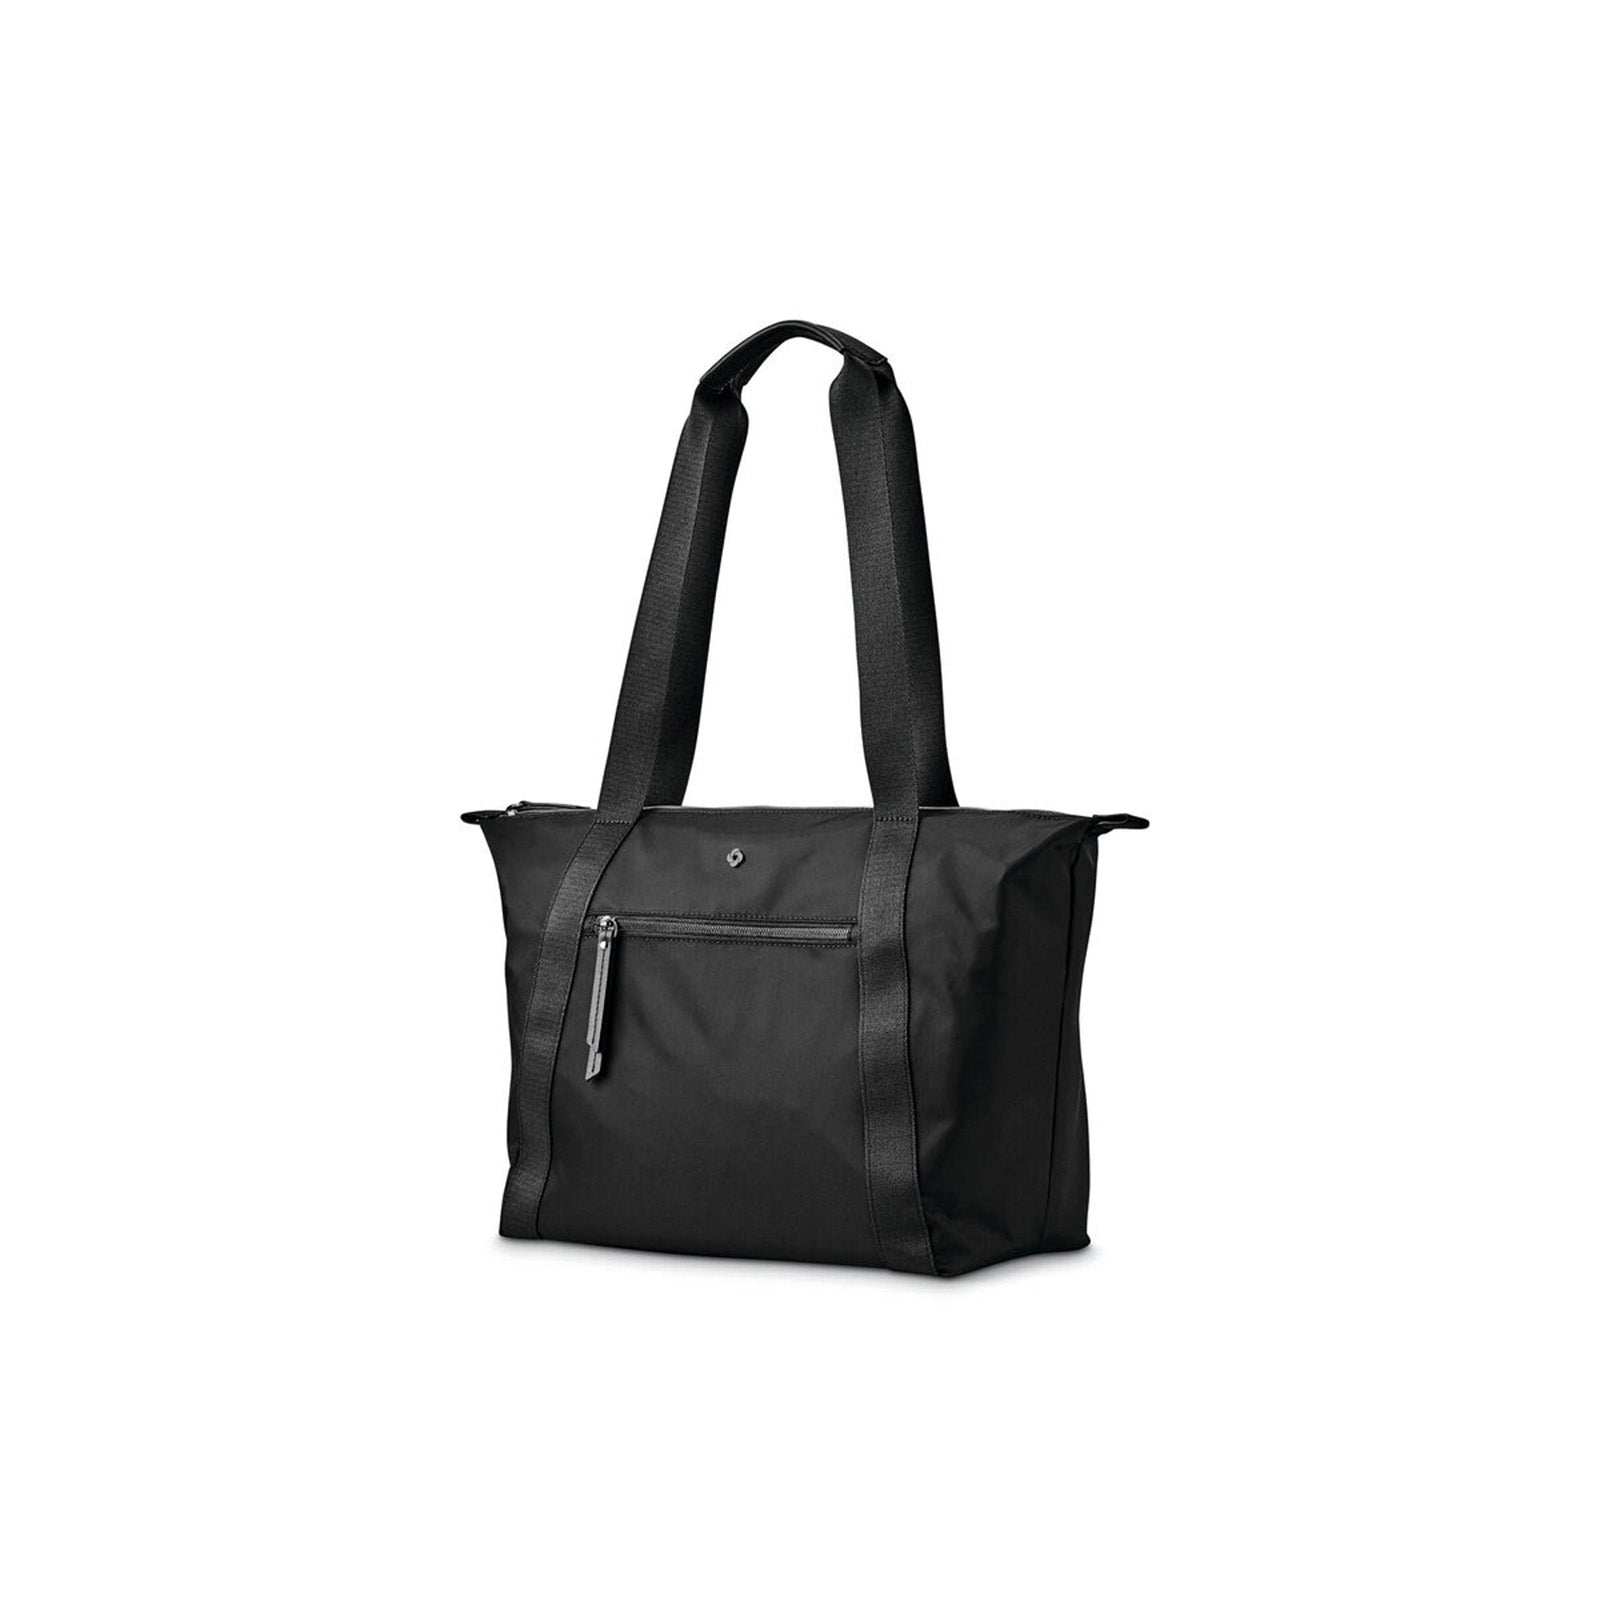 Samsonite-Mobile-Solutions-Classic-Carryall-Black-Front-Angle